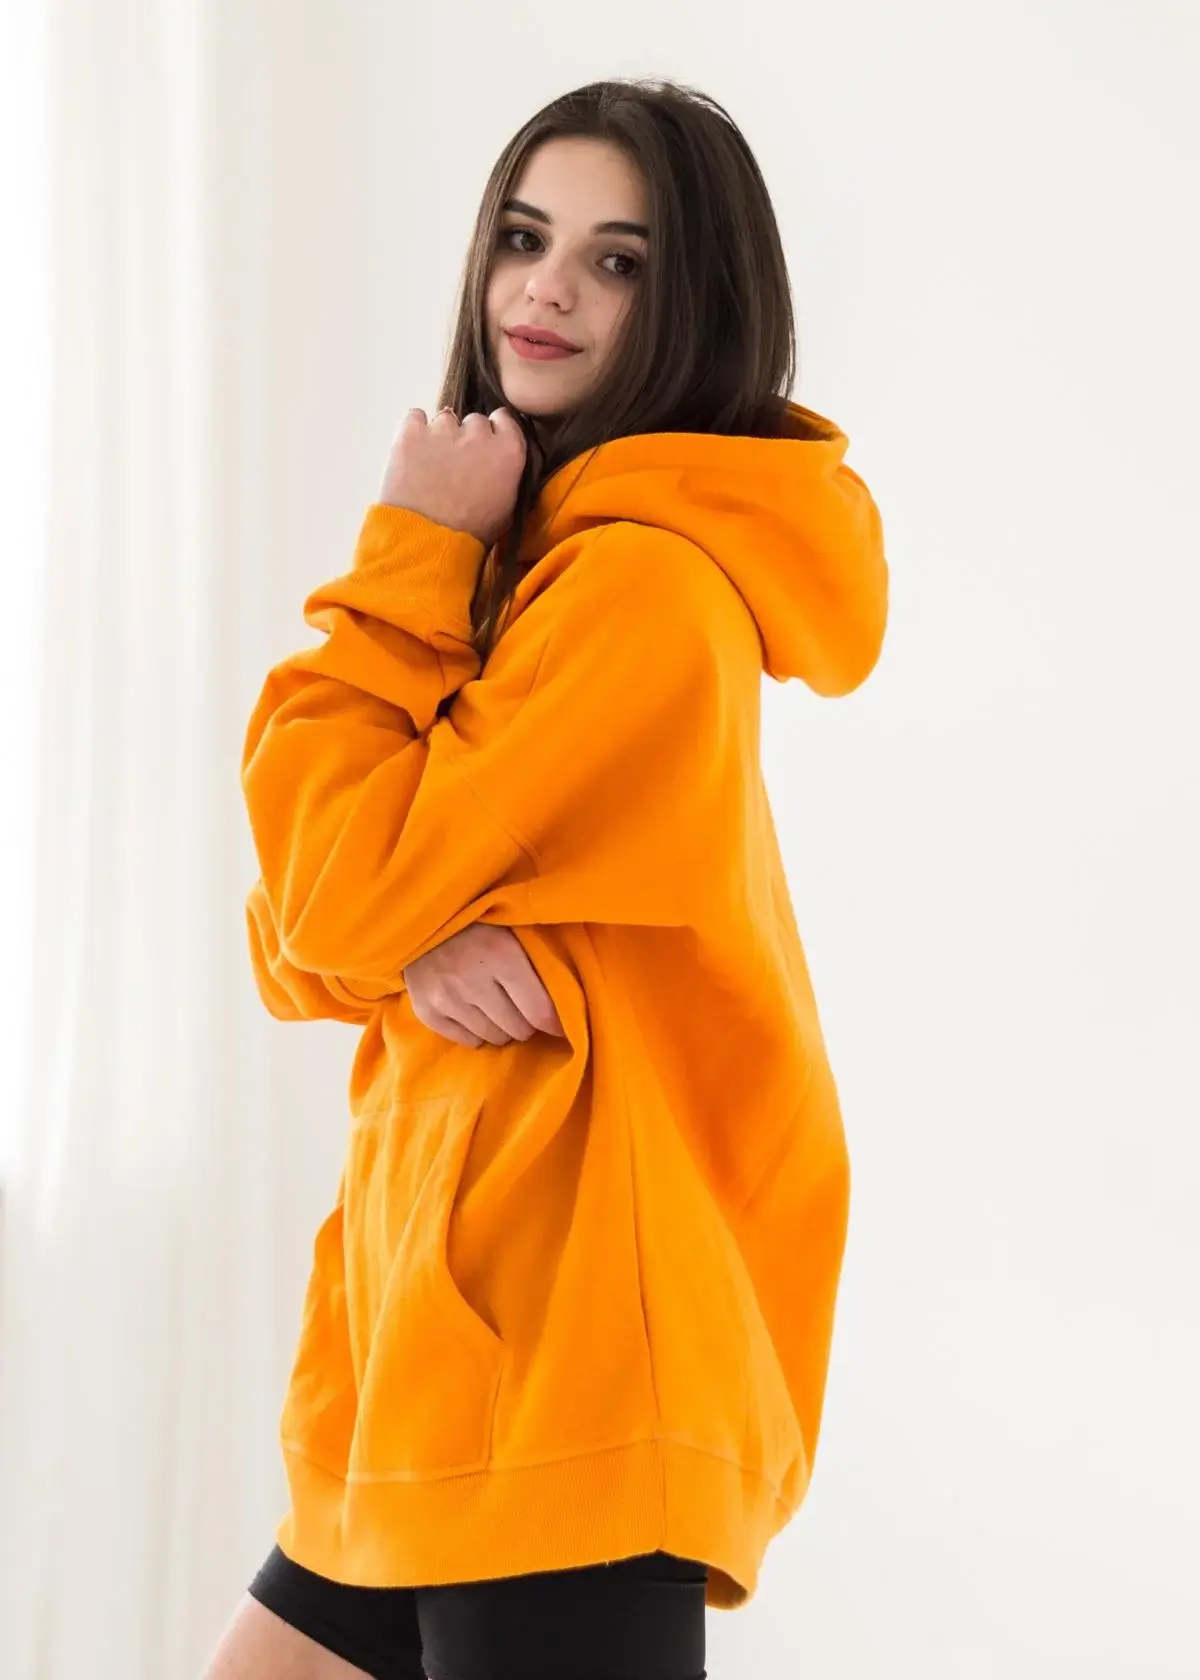 How to choose the right oversized hoodie?